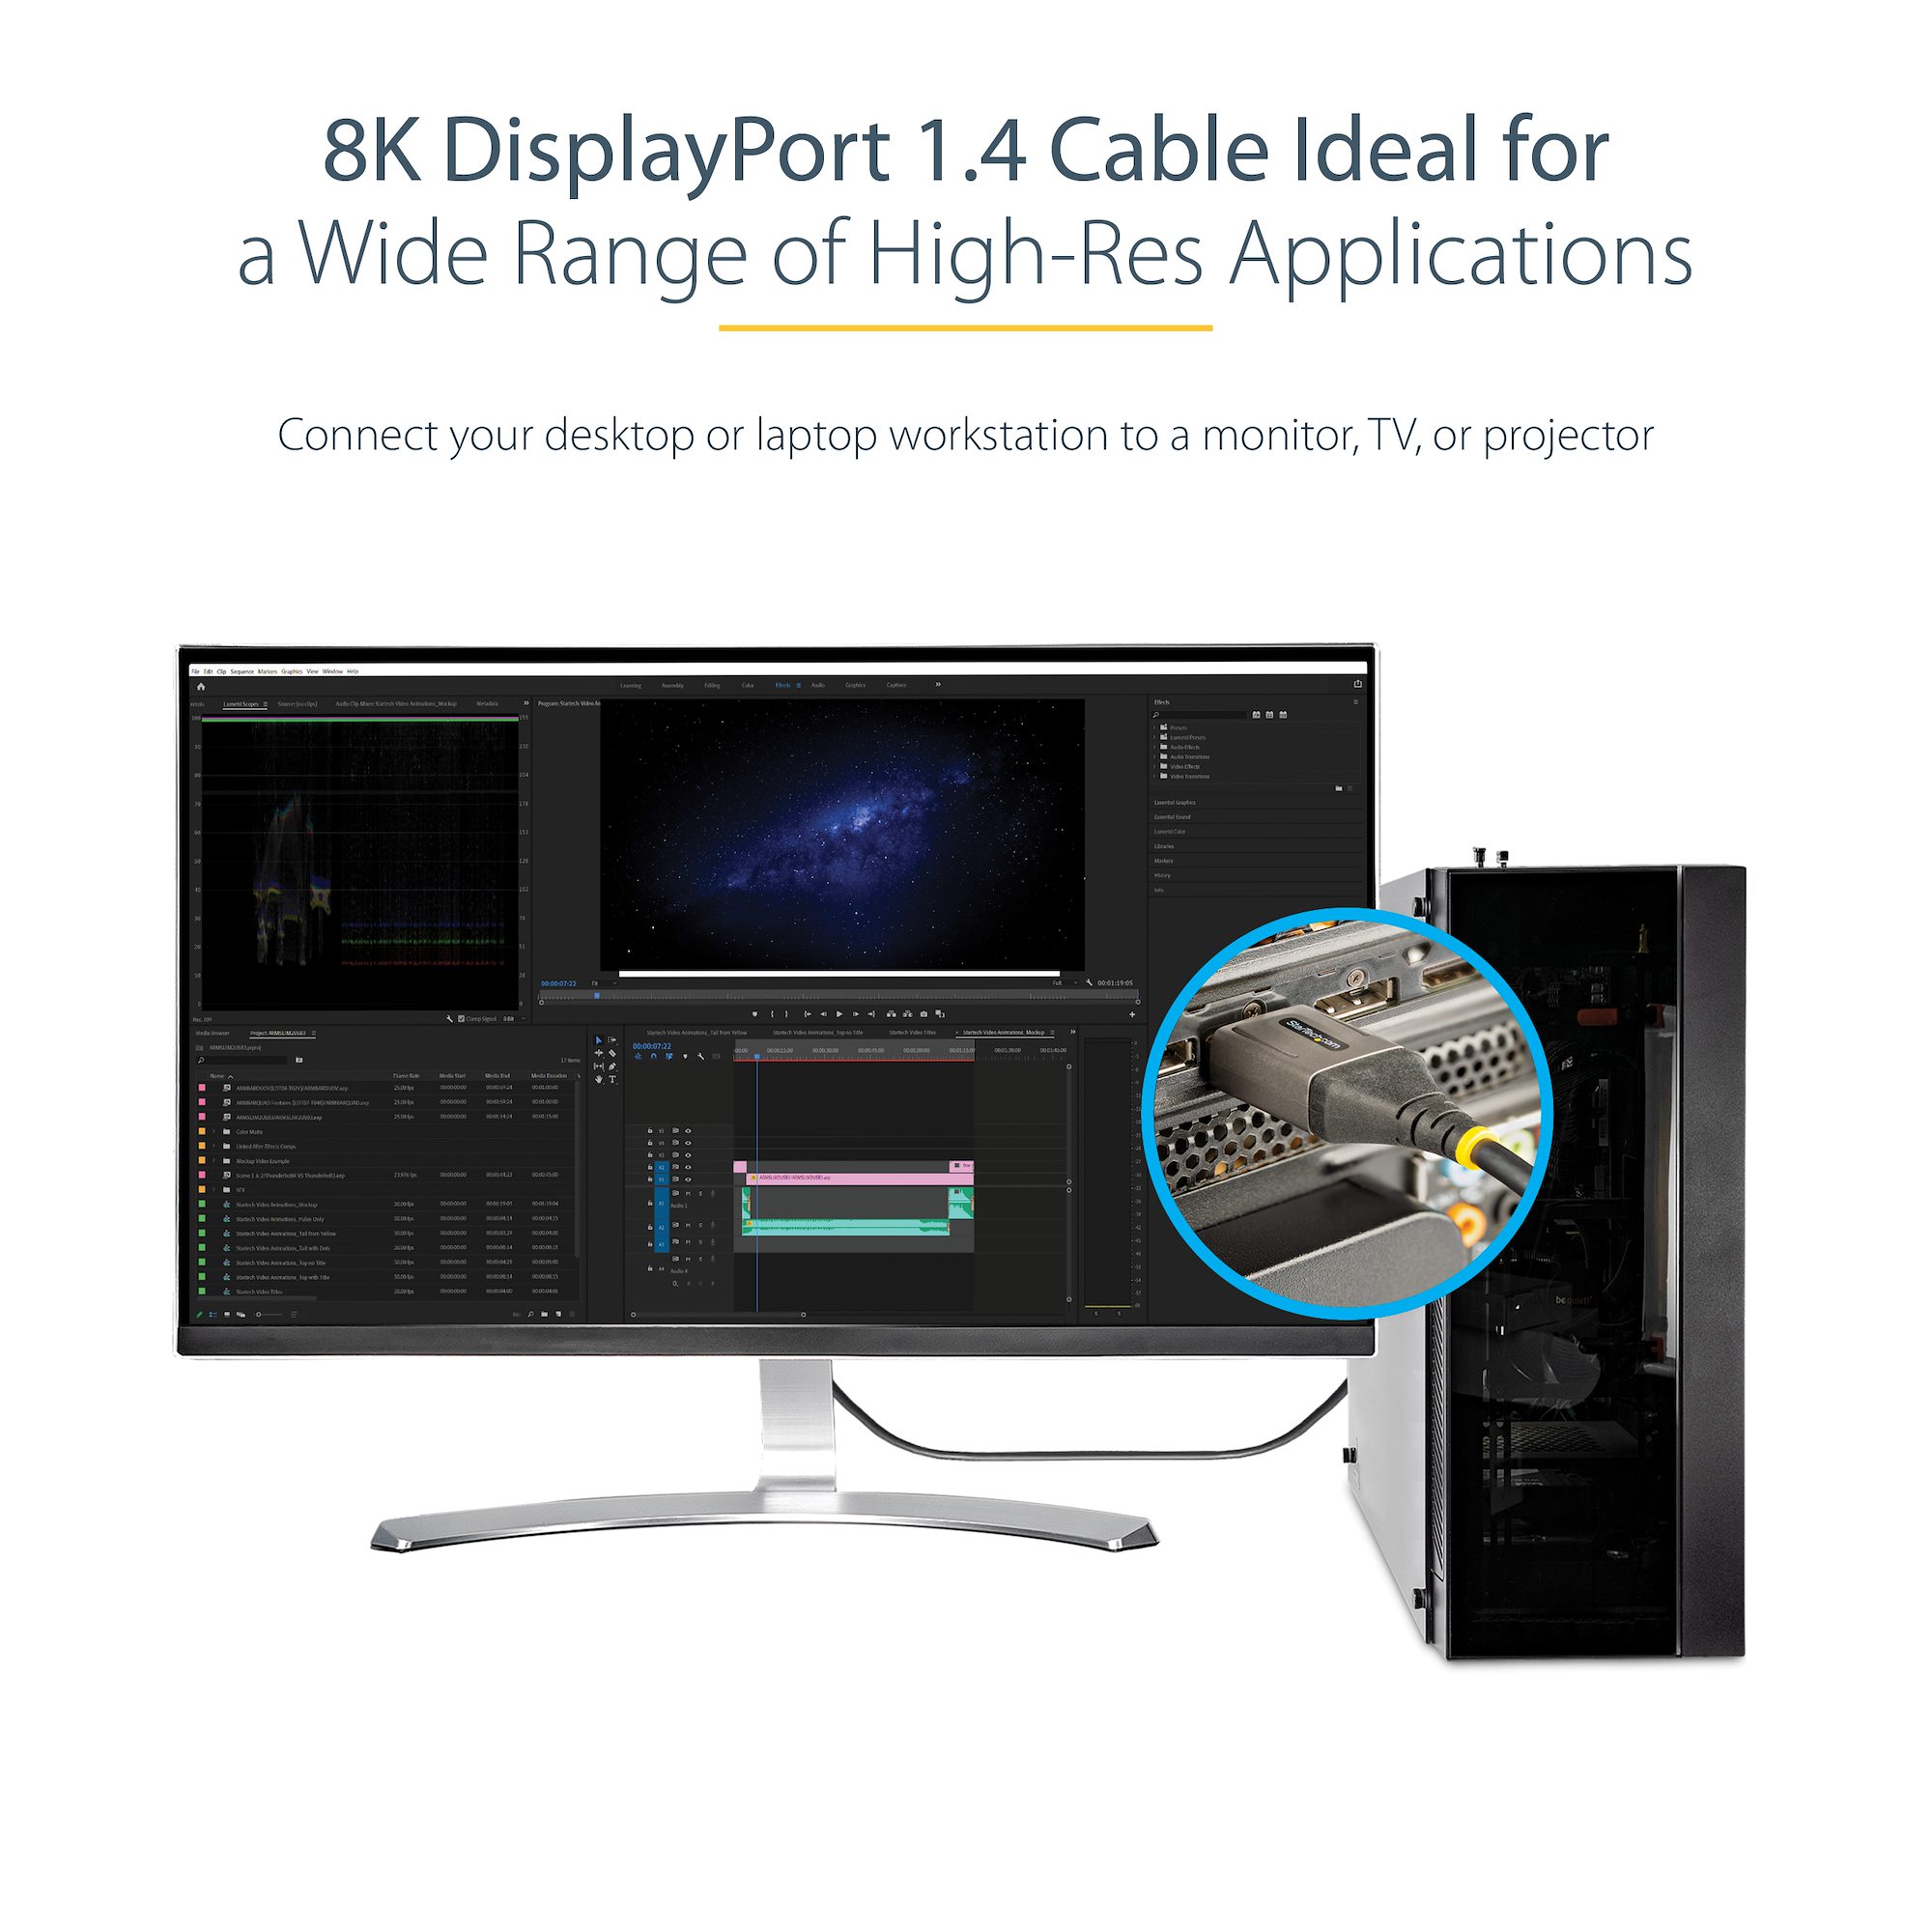 3ft Certified DisplayPort 1.4 Cable 8K - DisplayPort Cables & Adapter Cables, Cables